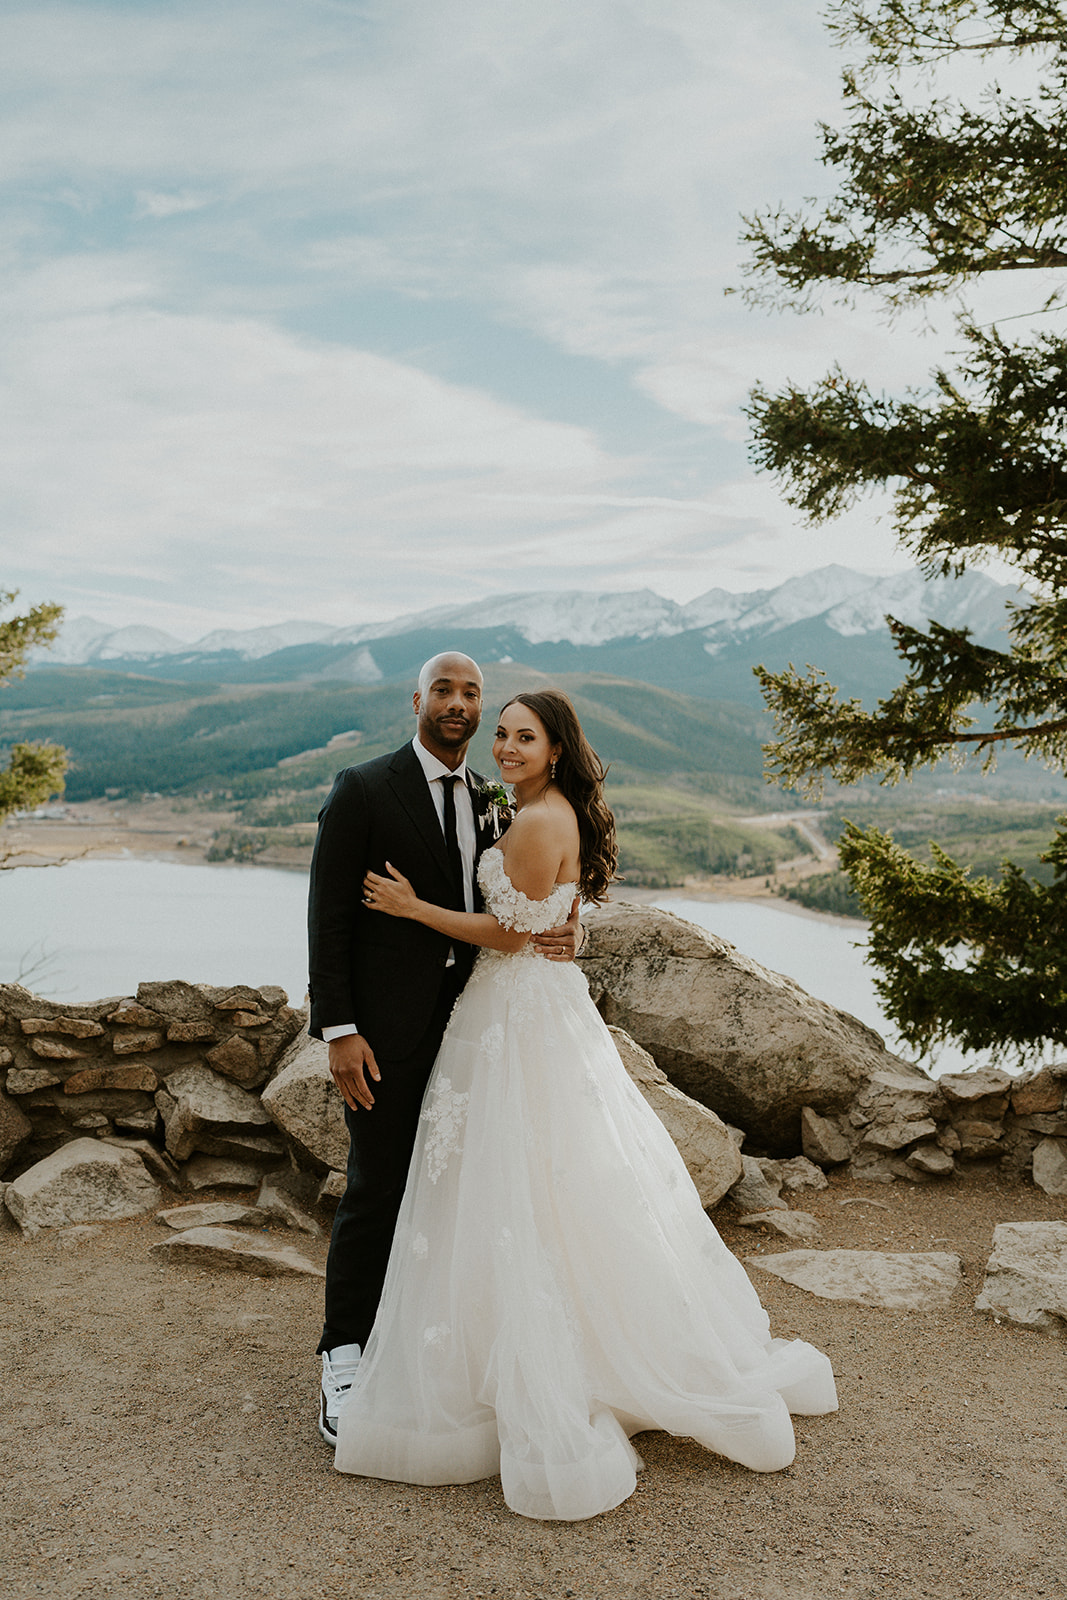 Newlyweds stand together in a mountain trail overlooking a lake at sunset